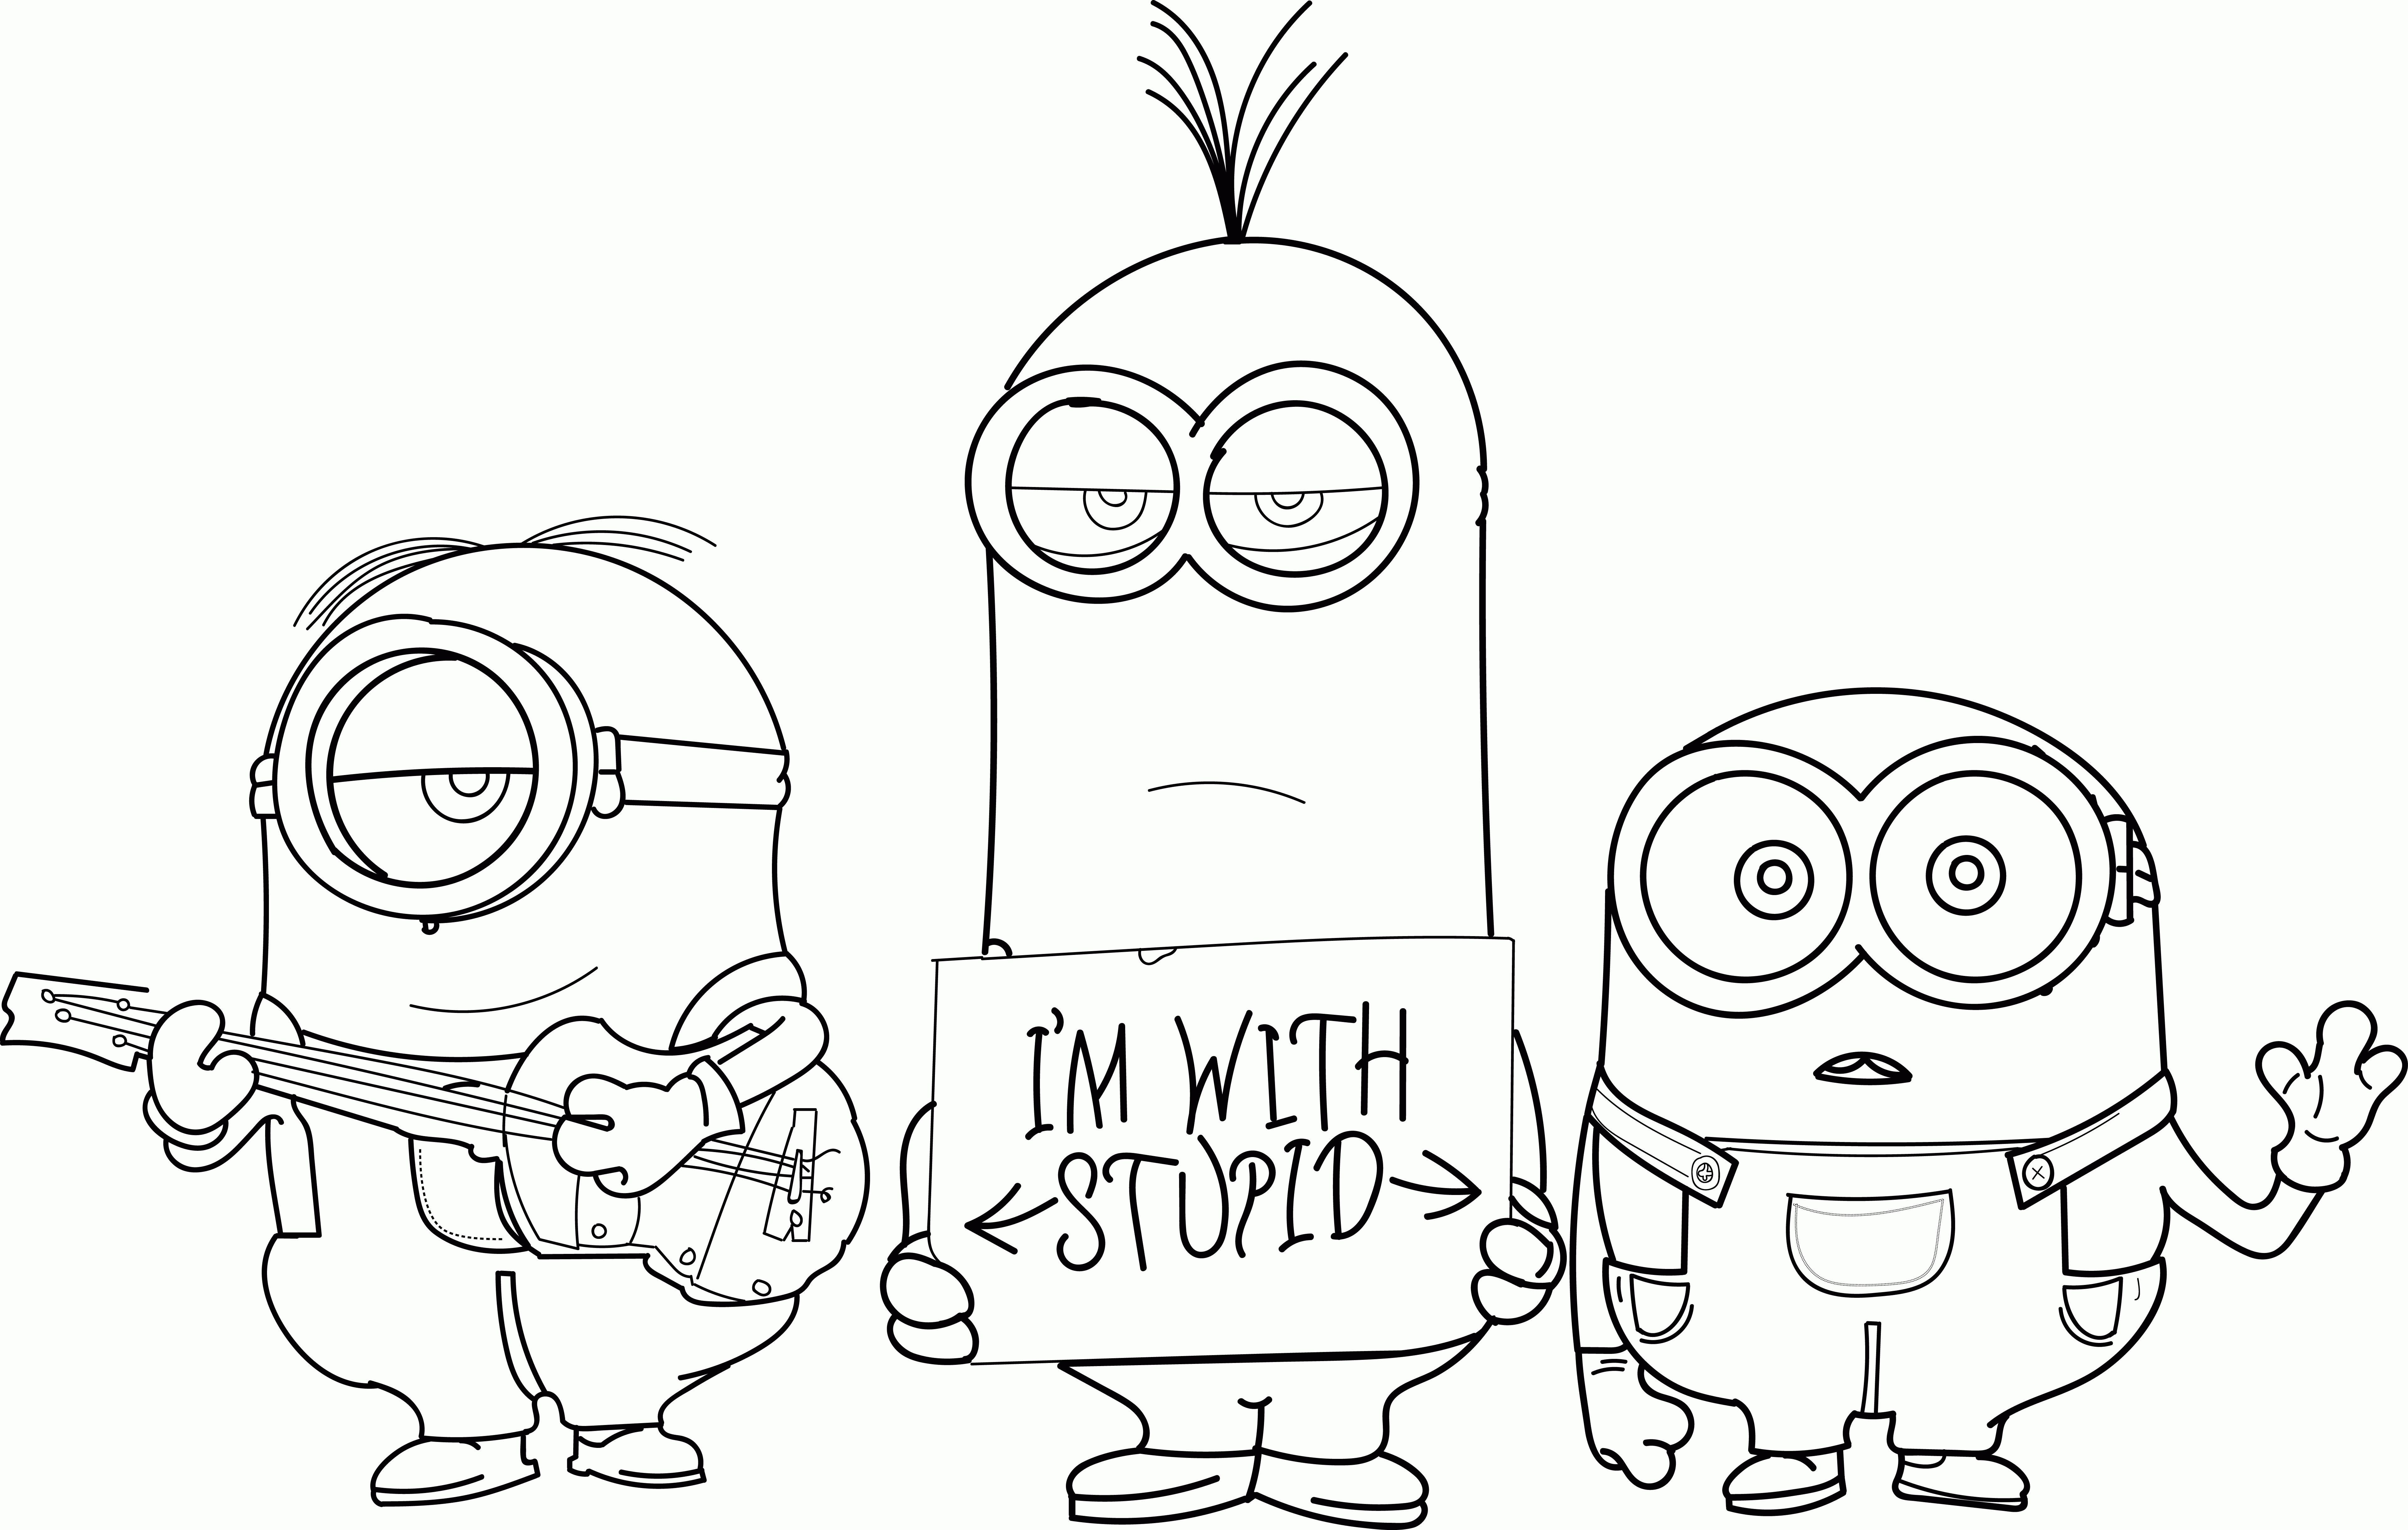 Free Minions Coloring Pages Bob Download Free Clip Art Free Clip Art On Clipart Library